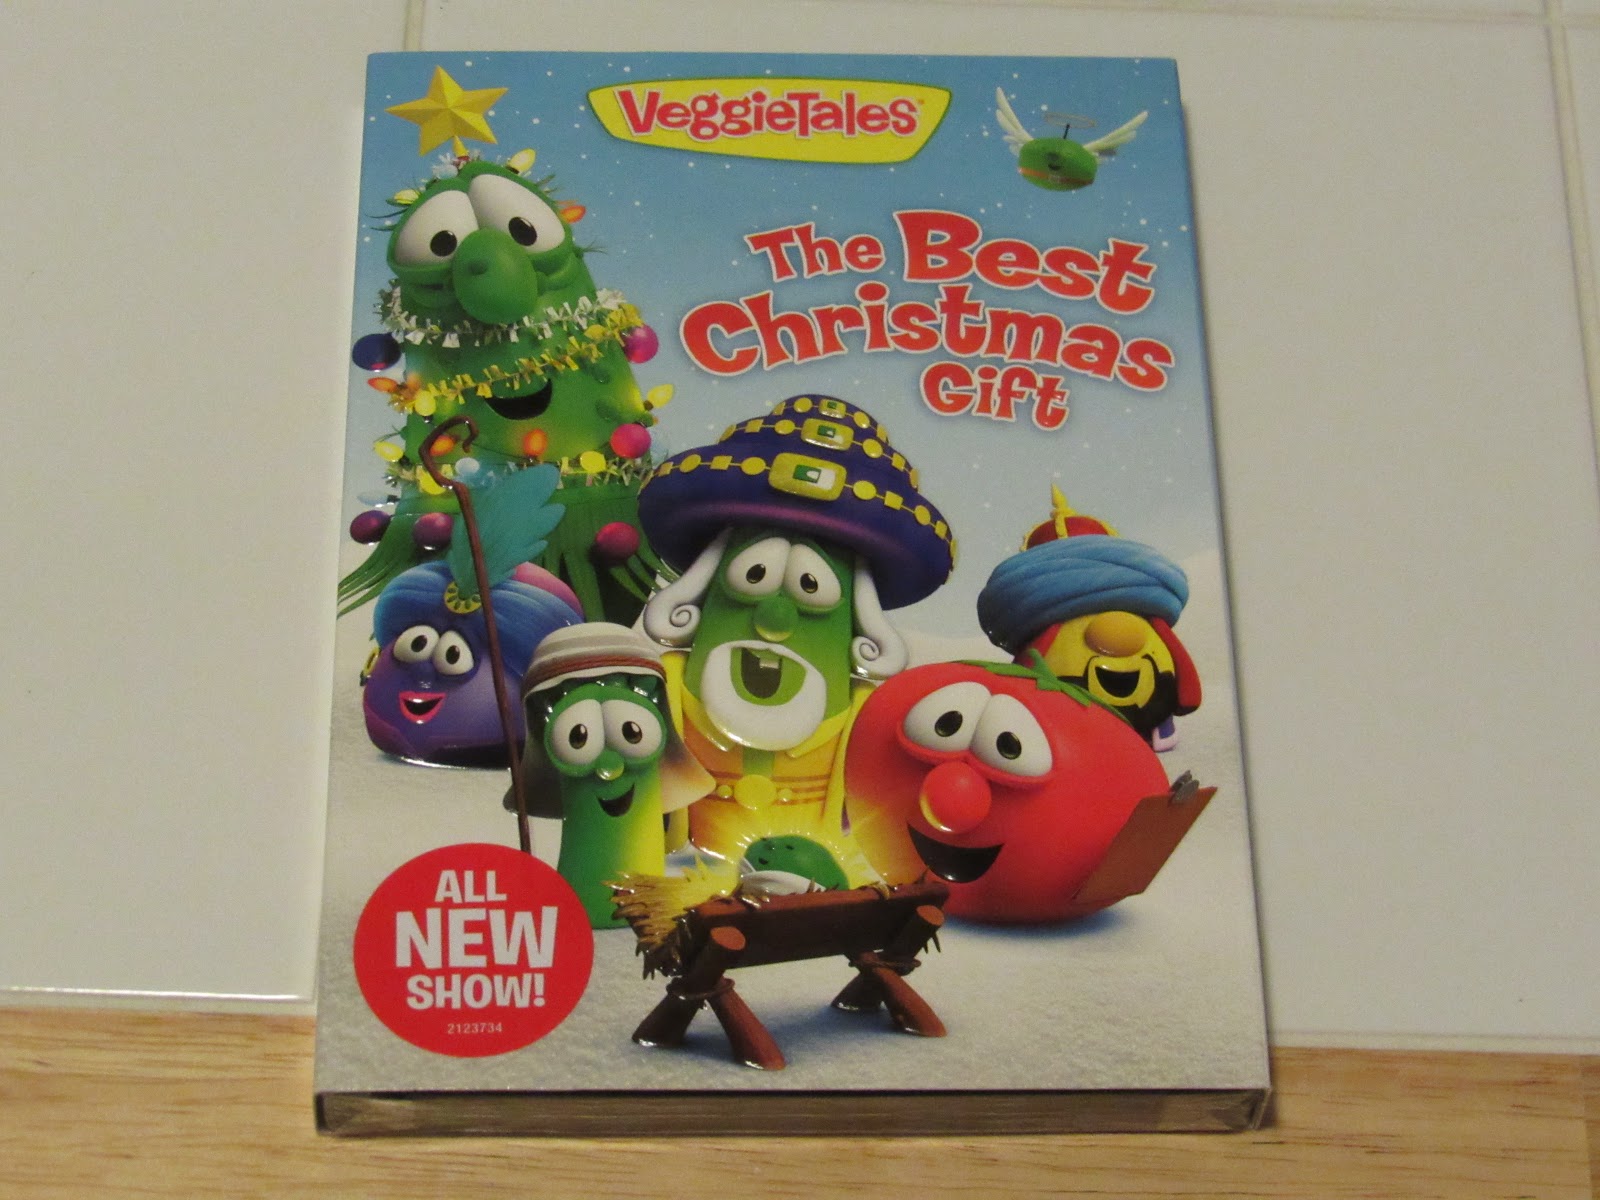 My daughter has always loved Veggie Tales when she was little. 